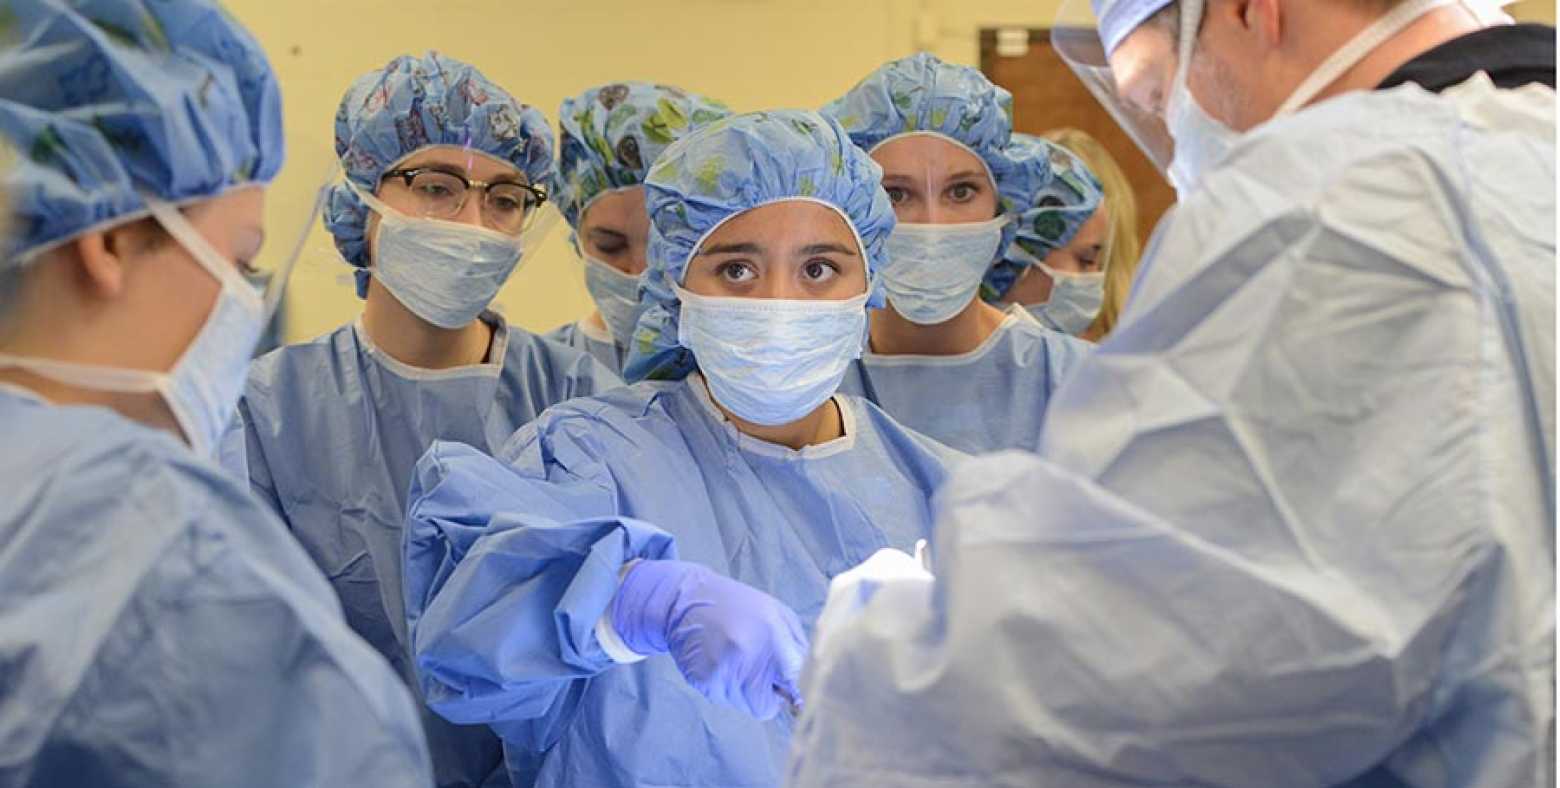 HIgh school students experience surgery with Dr. Ringnes